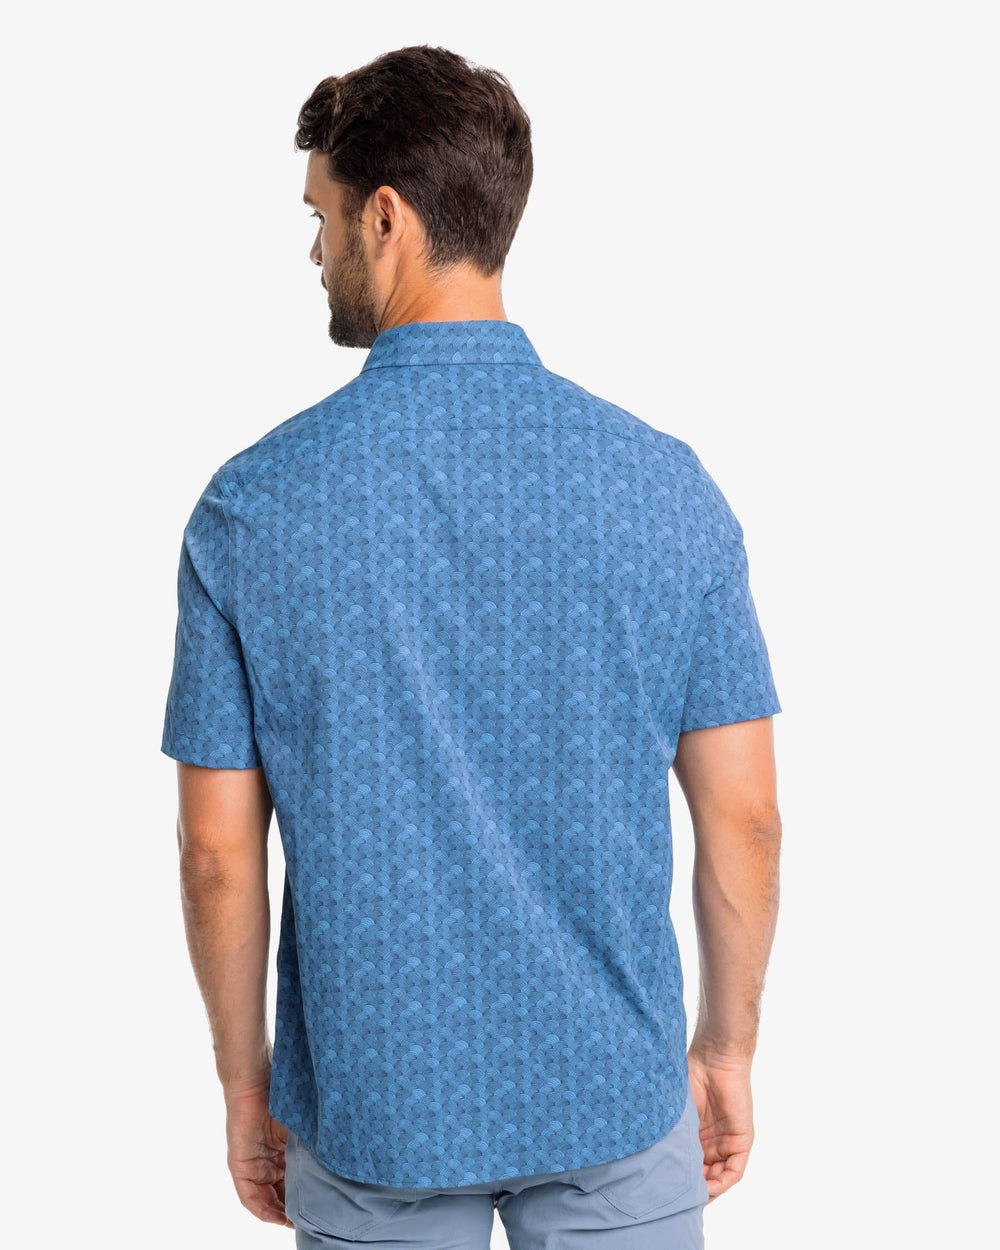 The back view of the Southern Tide Monterrey Print Intercoastal Short Sleeve Button Down by Southern Tide - Aged Denim